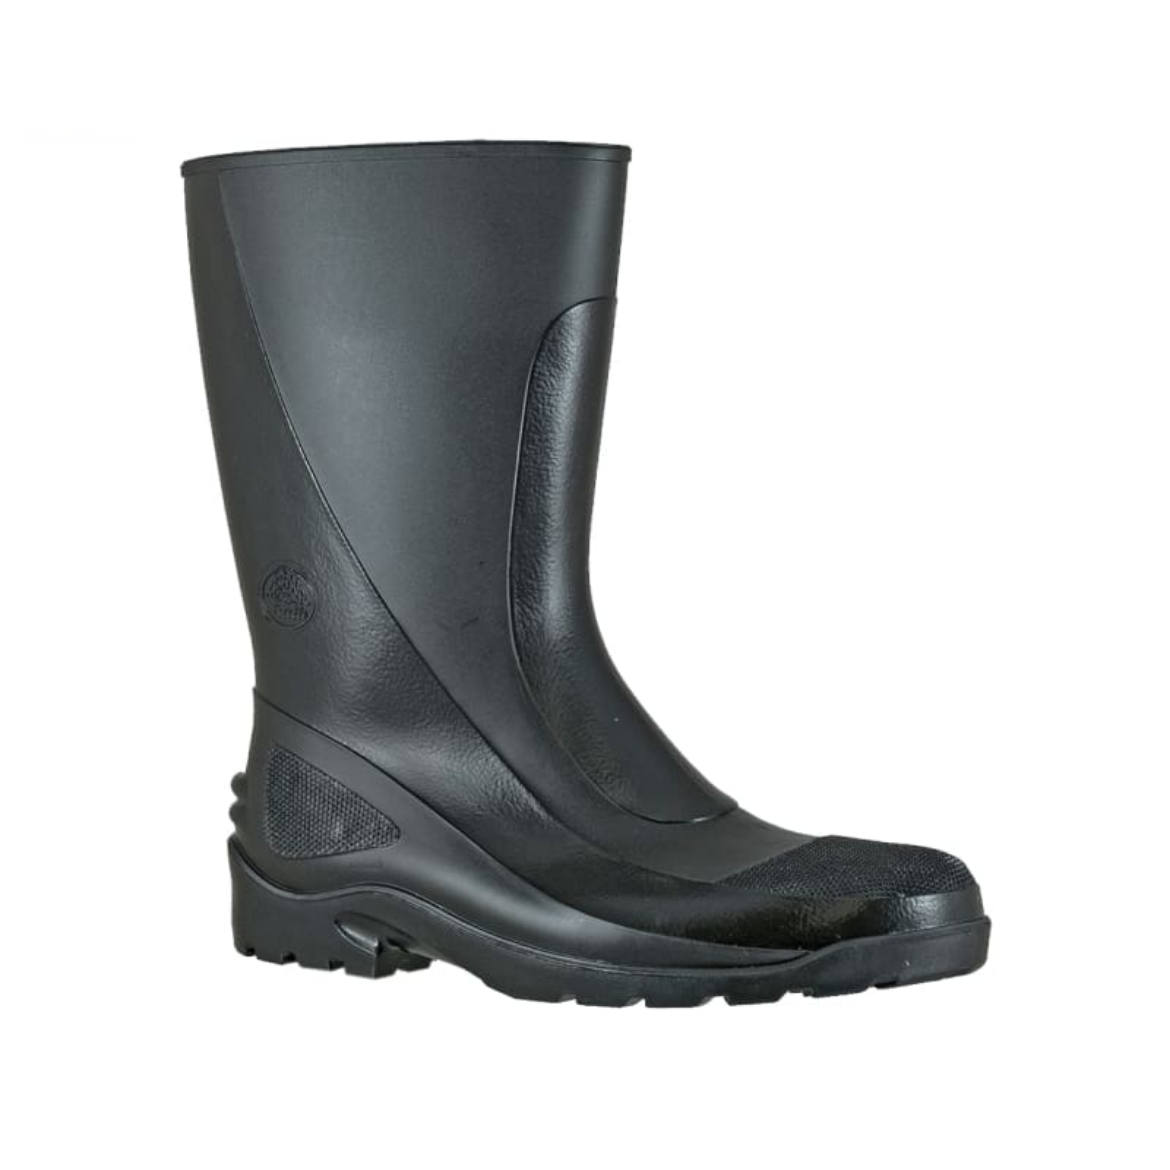 Picture of Bata Industrials, Handyman 300, Non-Safety Boot, PVC 300mm